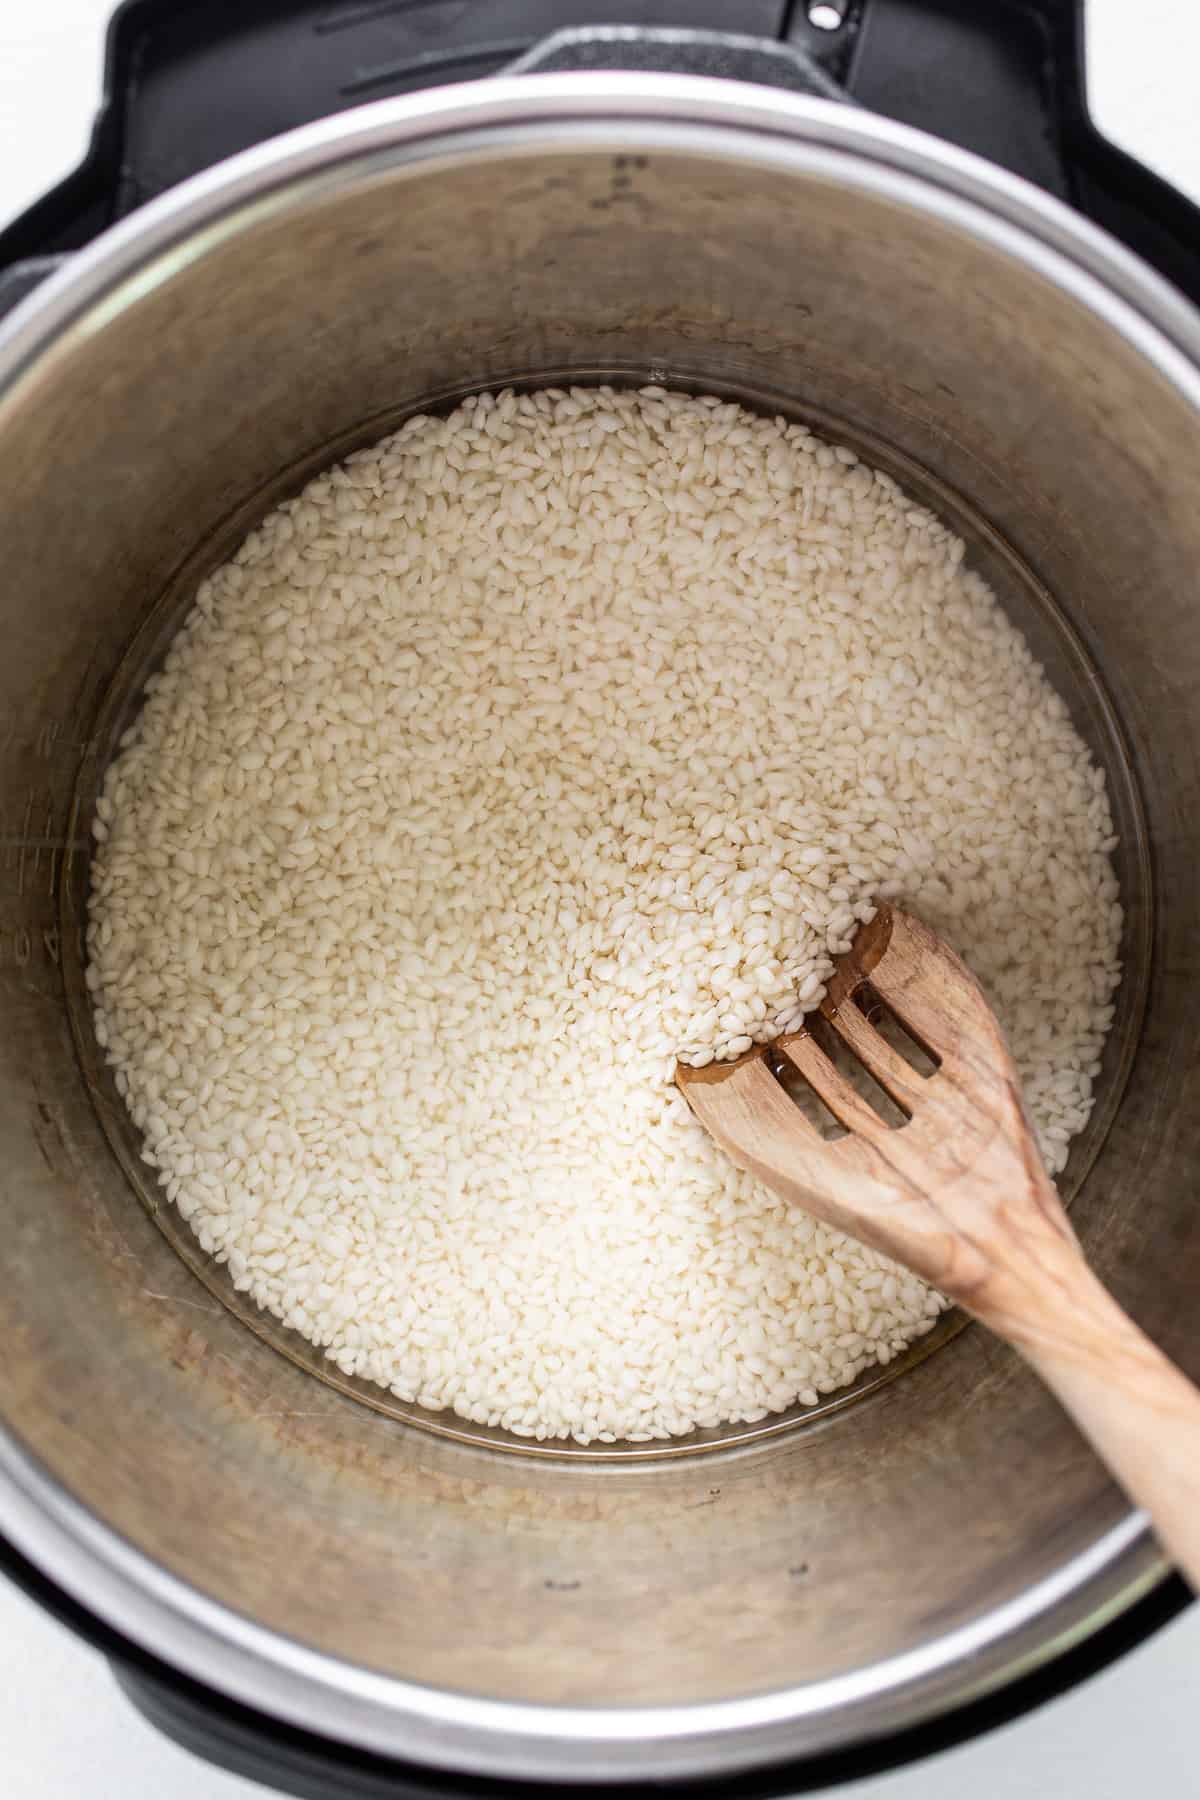 https://fitfoodiefinds.com/wp-content/uploads/2023/03/Instant-Pot-Sticky-Rice-5.jpg